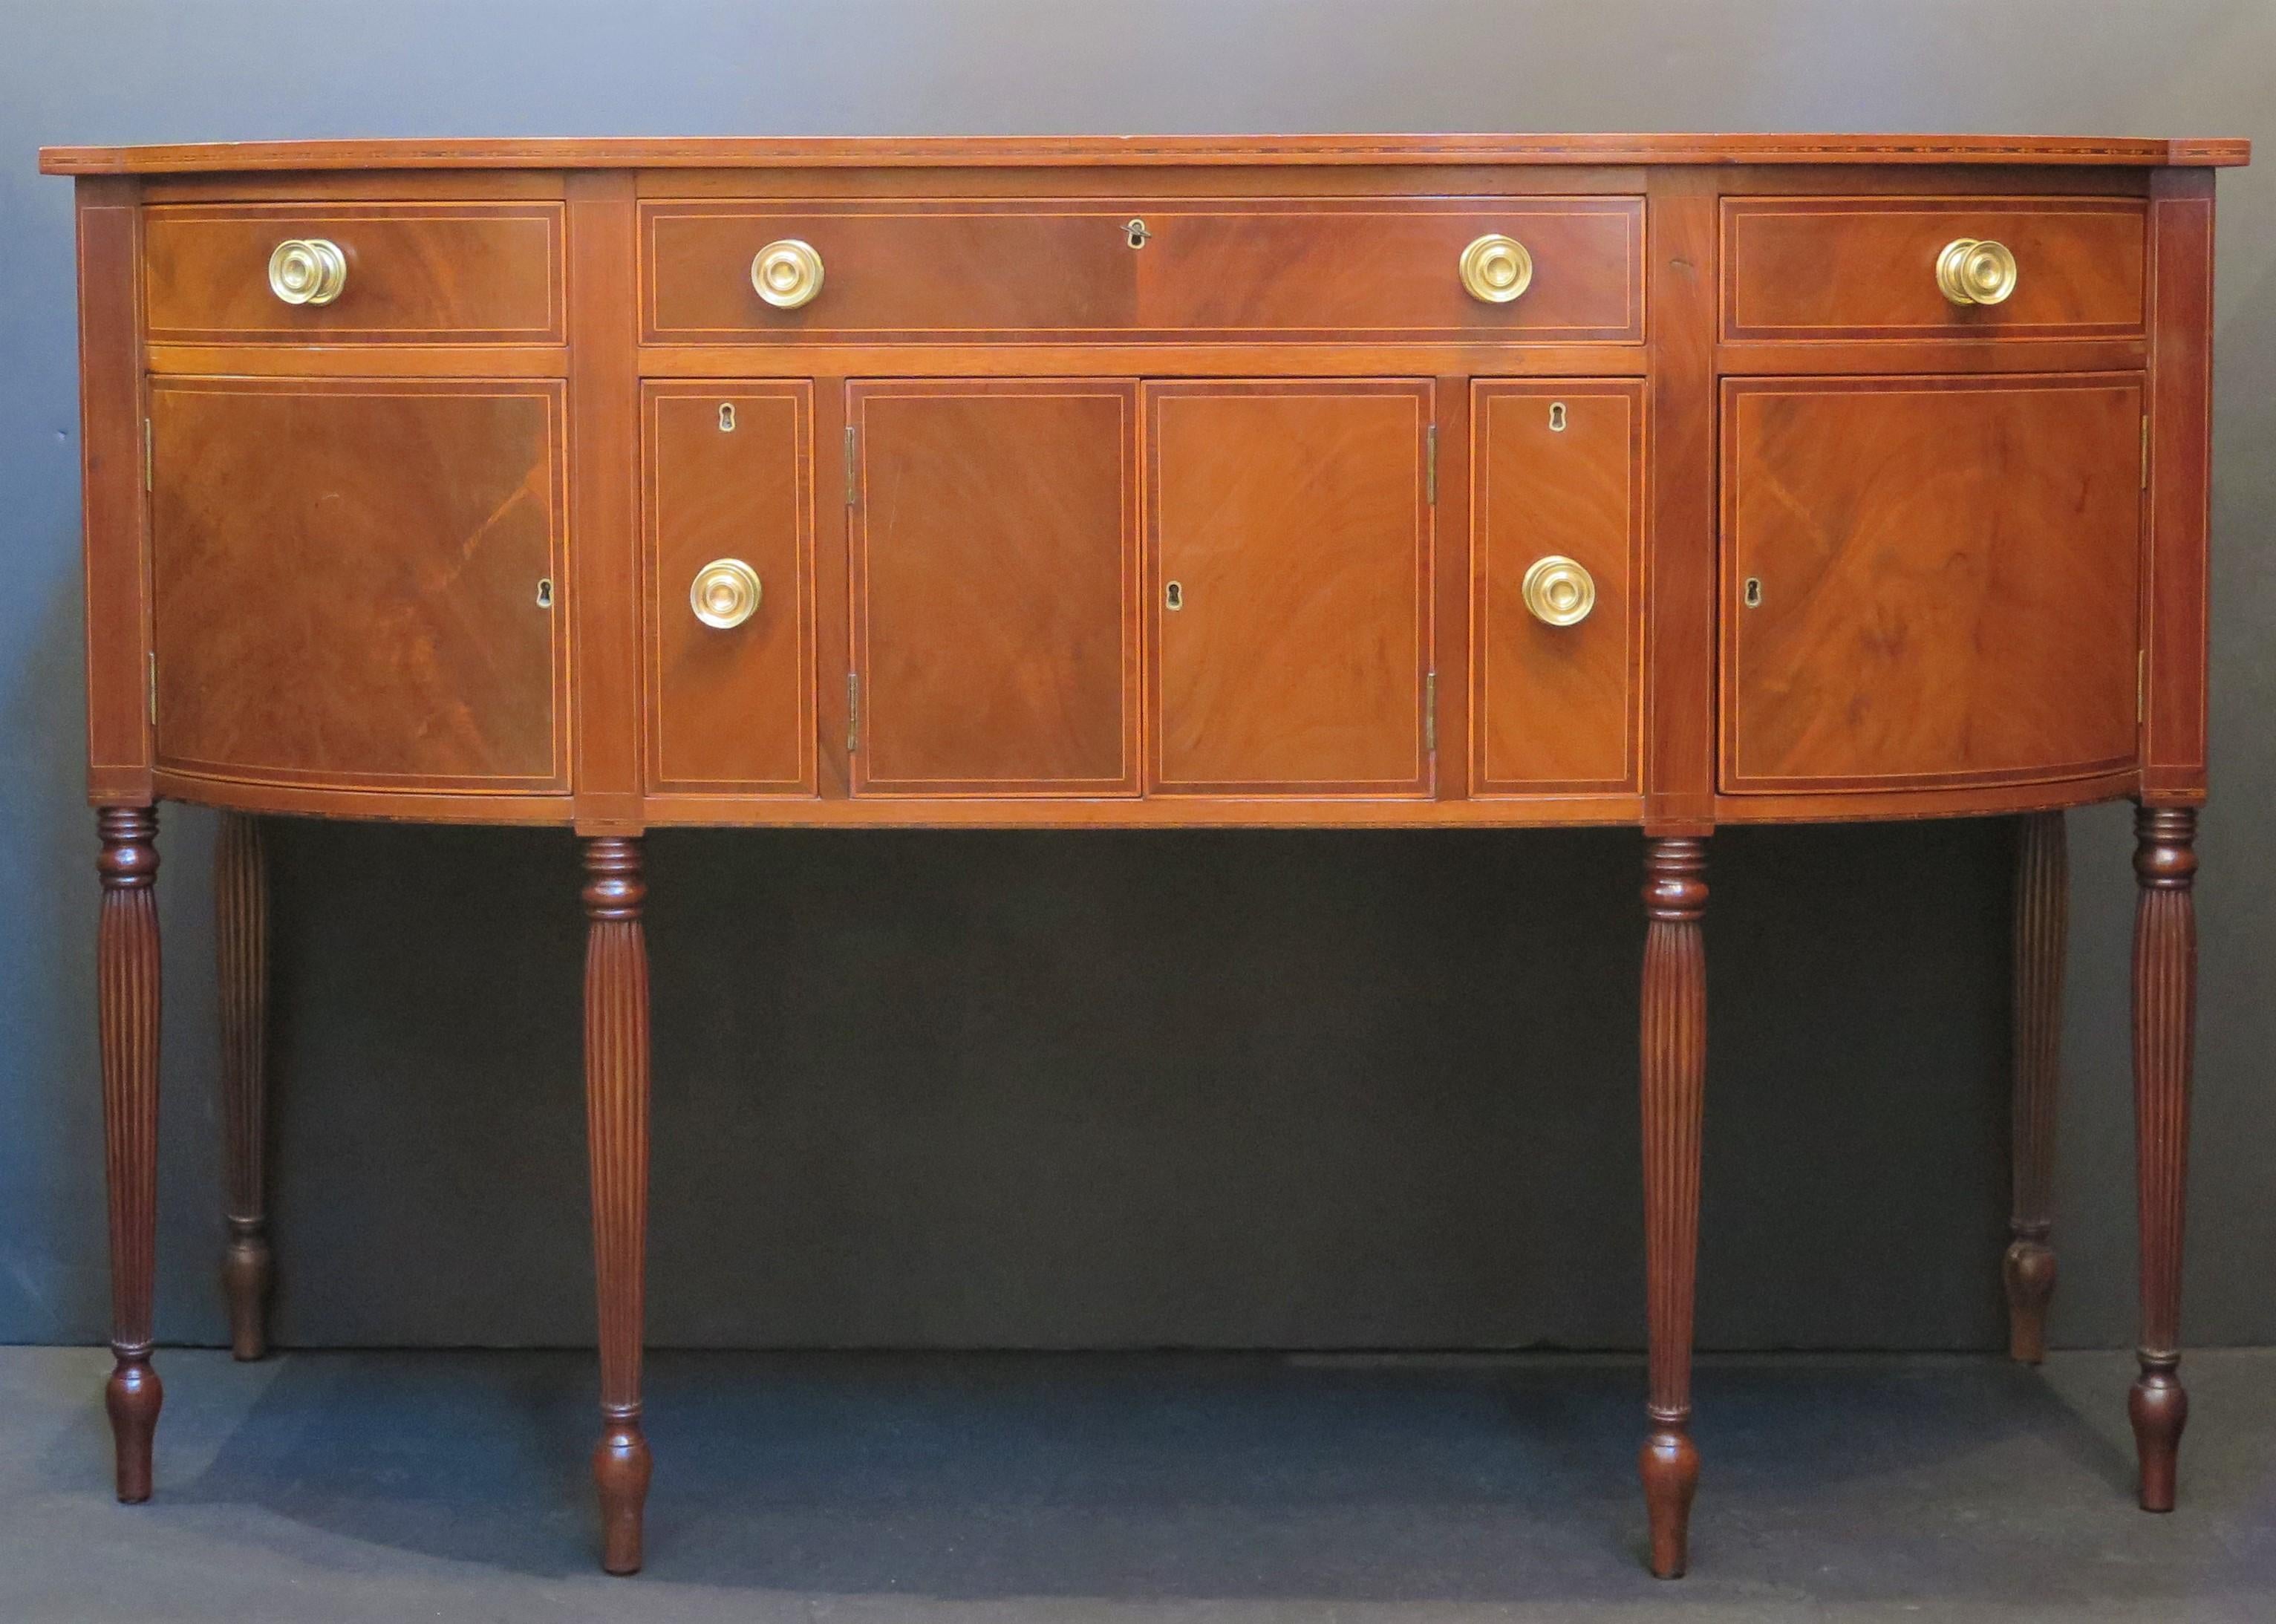 An American Federal mahogany sideboard with an elongated 